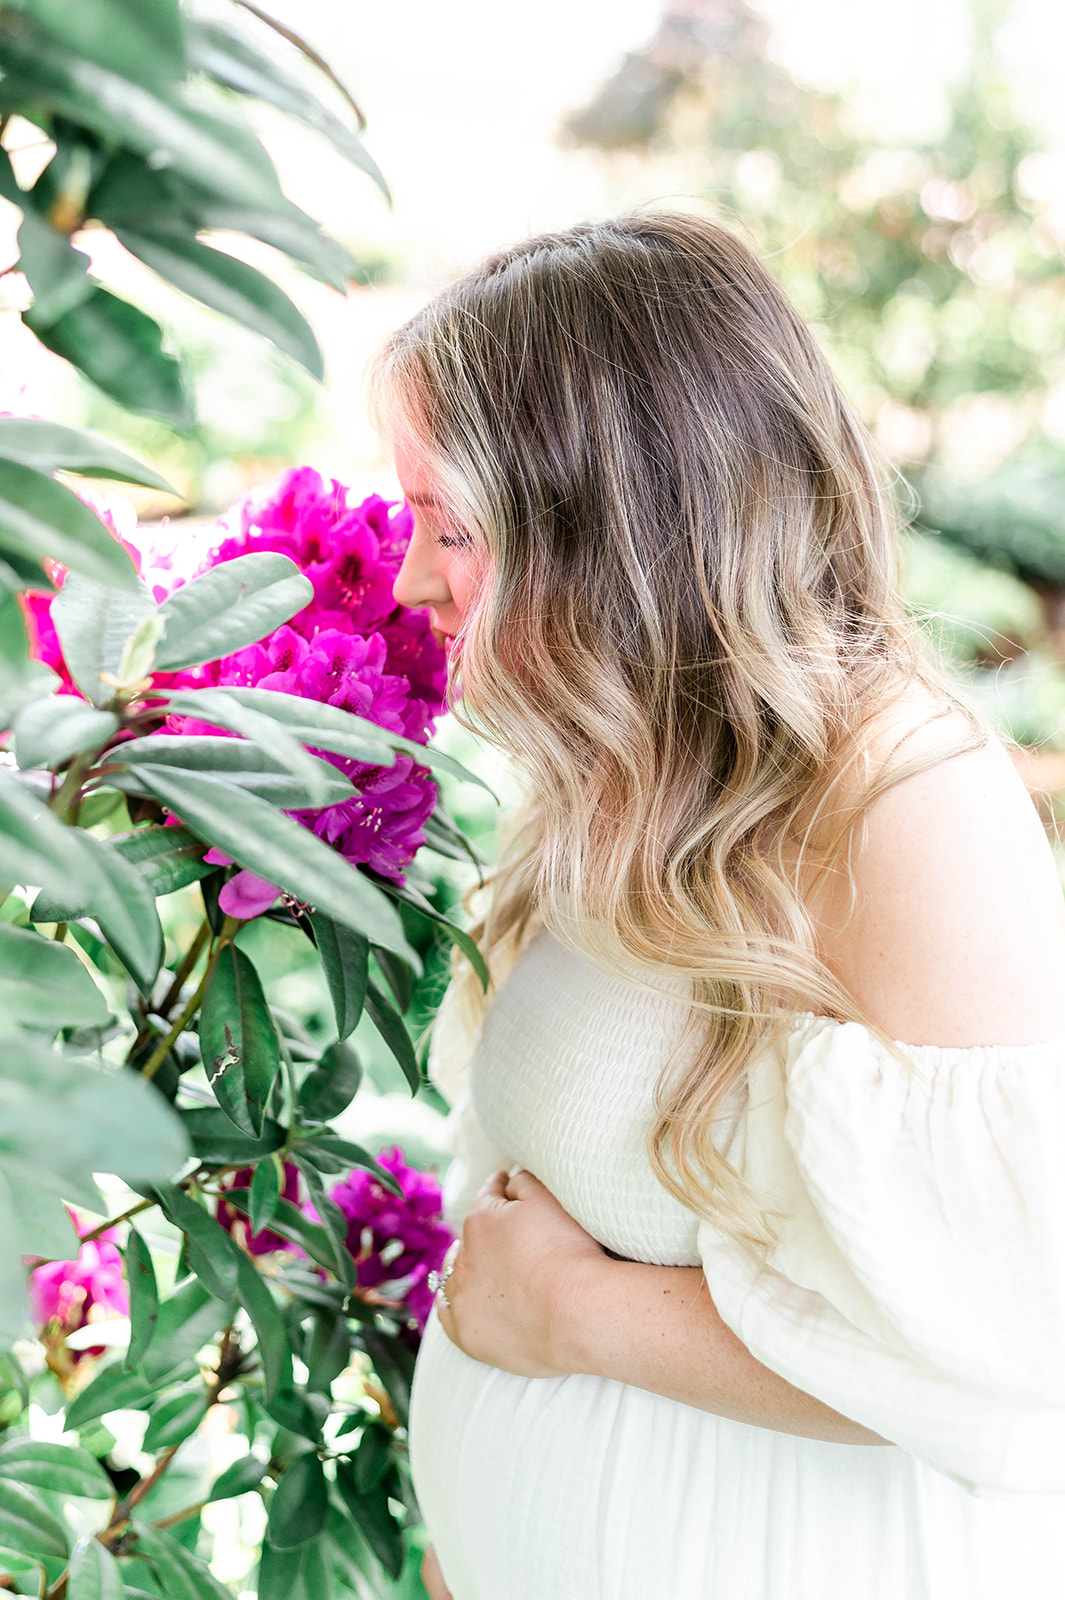 pregnant woman smelling a flower